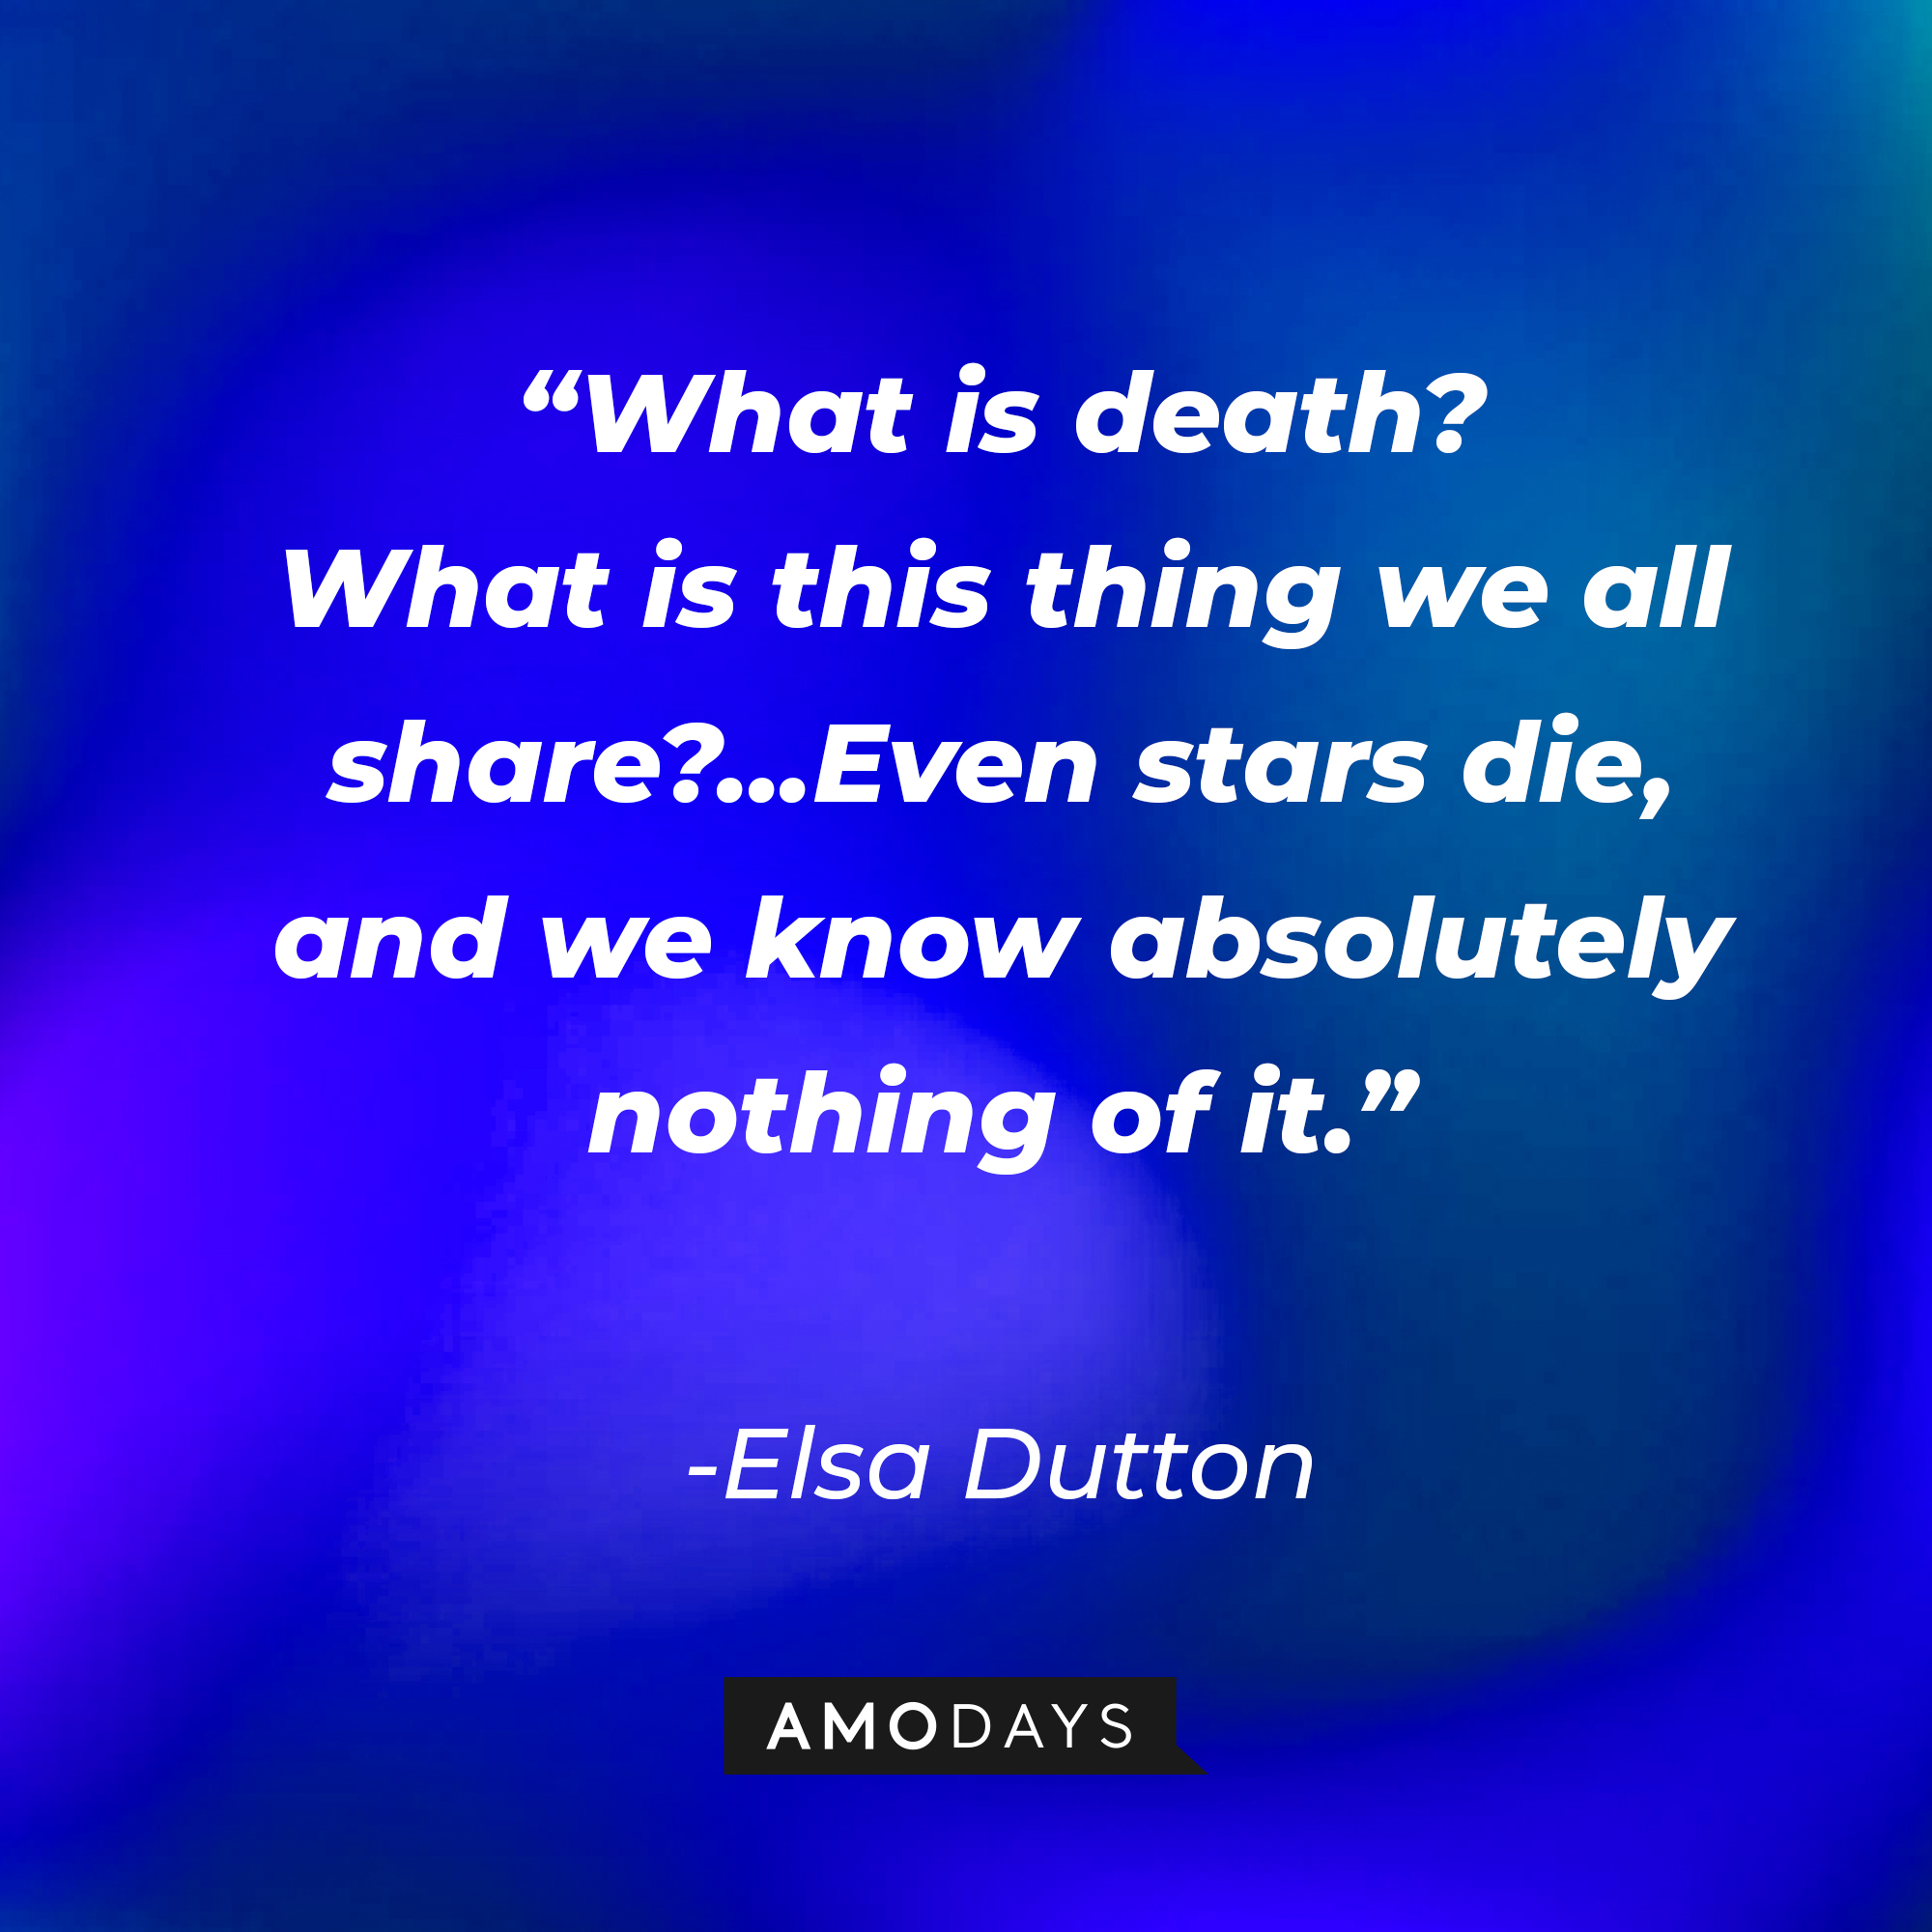 Elsa Dutton’s quote: “I have no home. Which is to say, my home is everywhere.” | Source: AmoDays  | Source: AmoDays